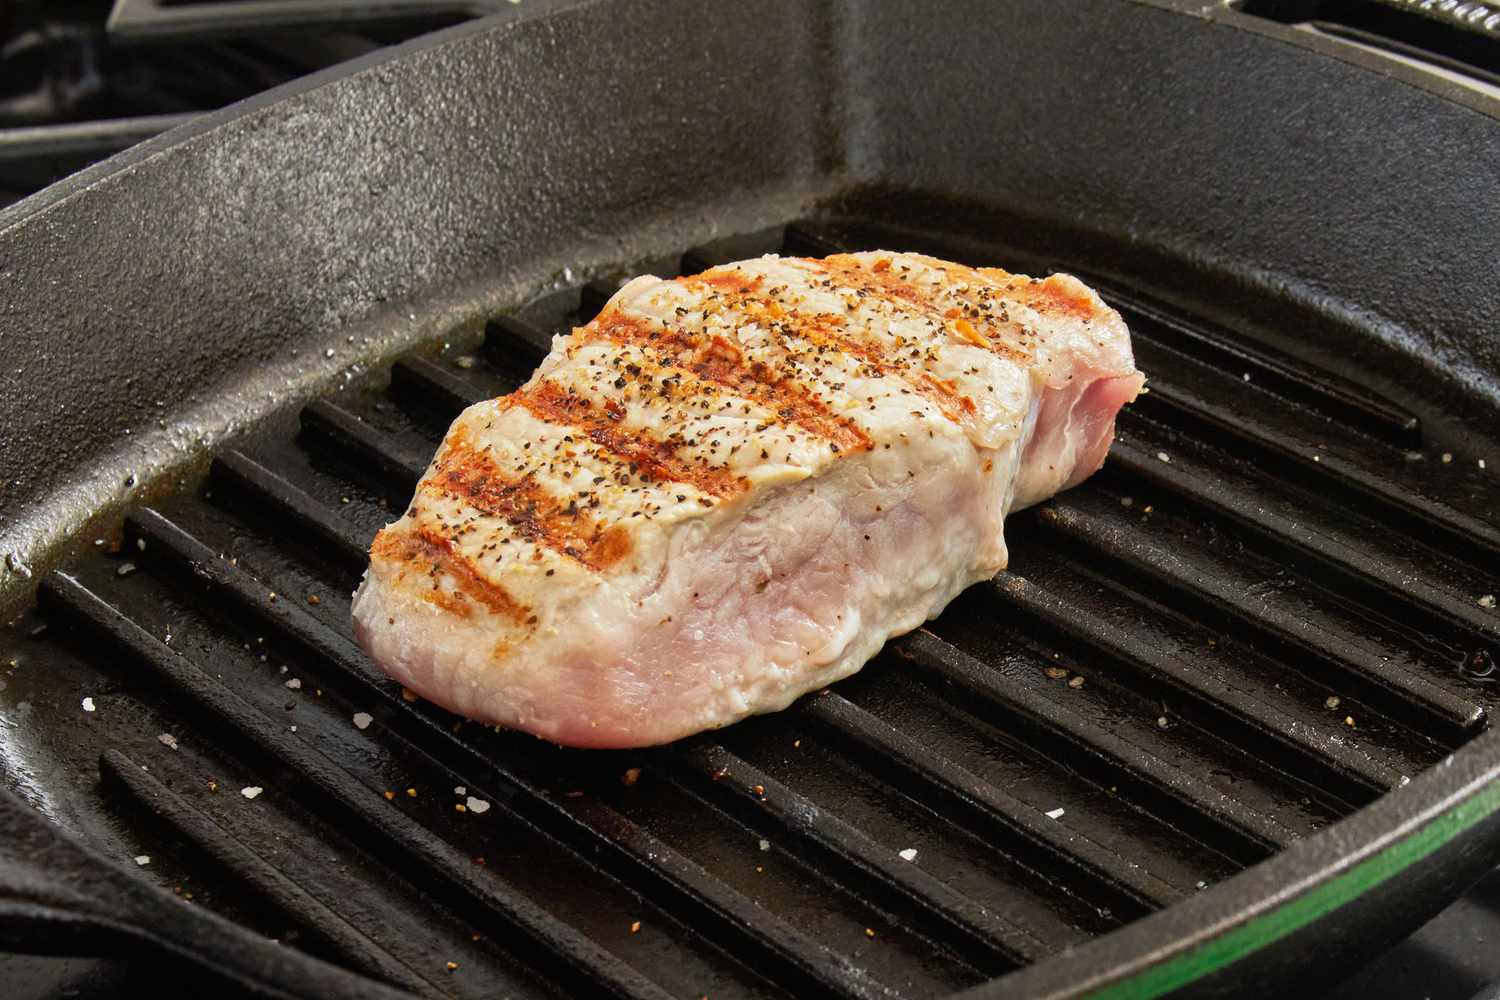 Close-up of a pork chop being grilled on the Lodge Seasoned Cast Iron Square Grill Pan showing grill marks.